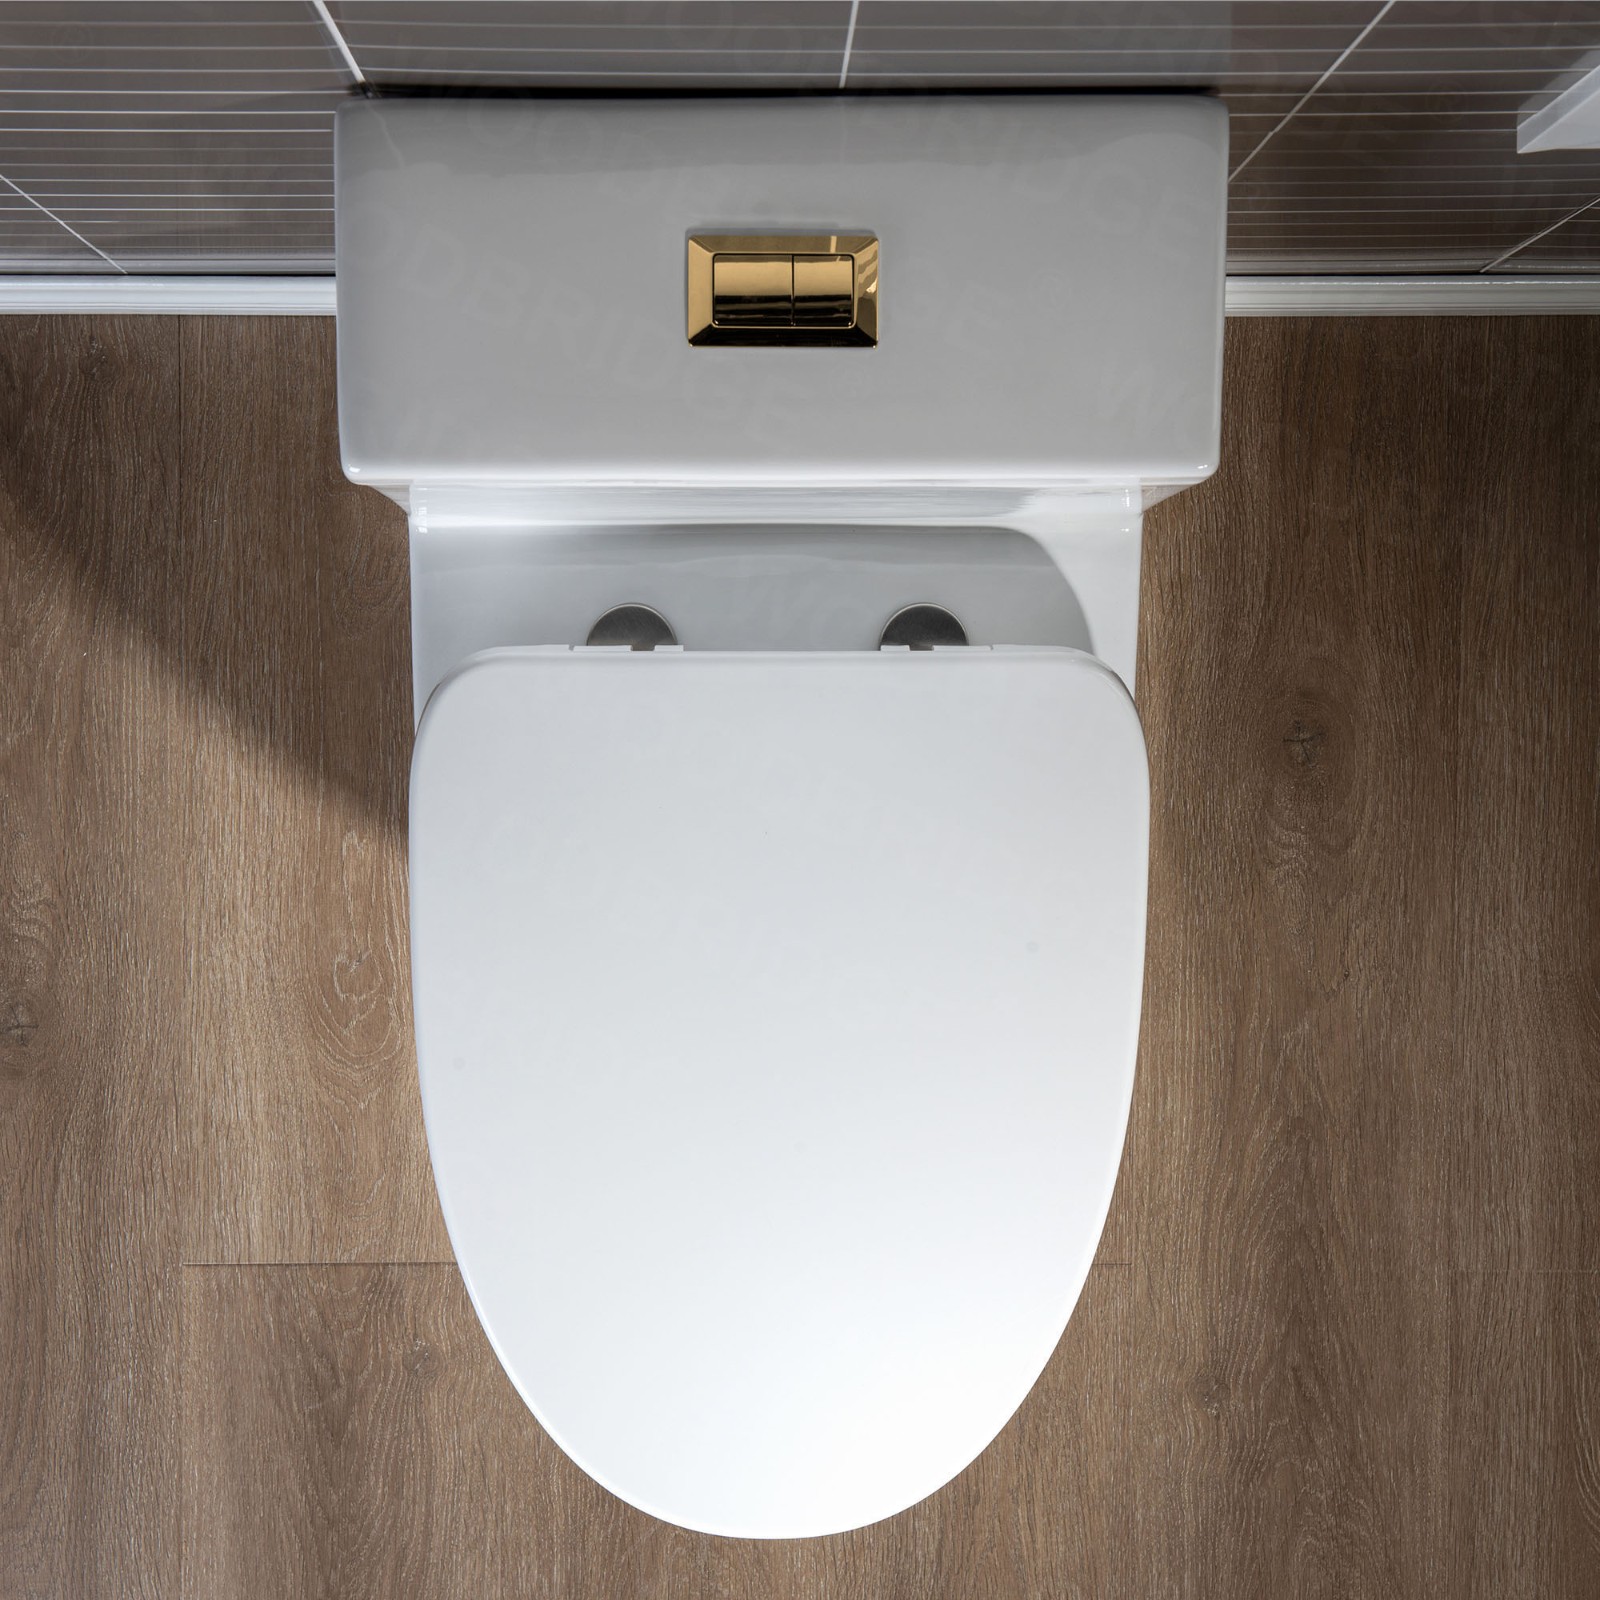  WOODBRIDGE Modern One Piece Dual Flush 1.28 GP Toilet,with Soft Closing Seat, Brushed Gold Button B0750-BG, White_5623